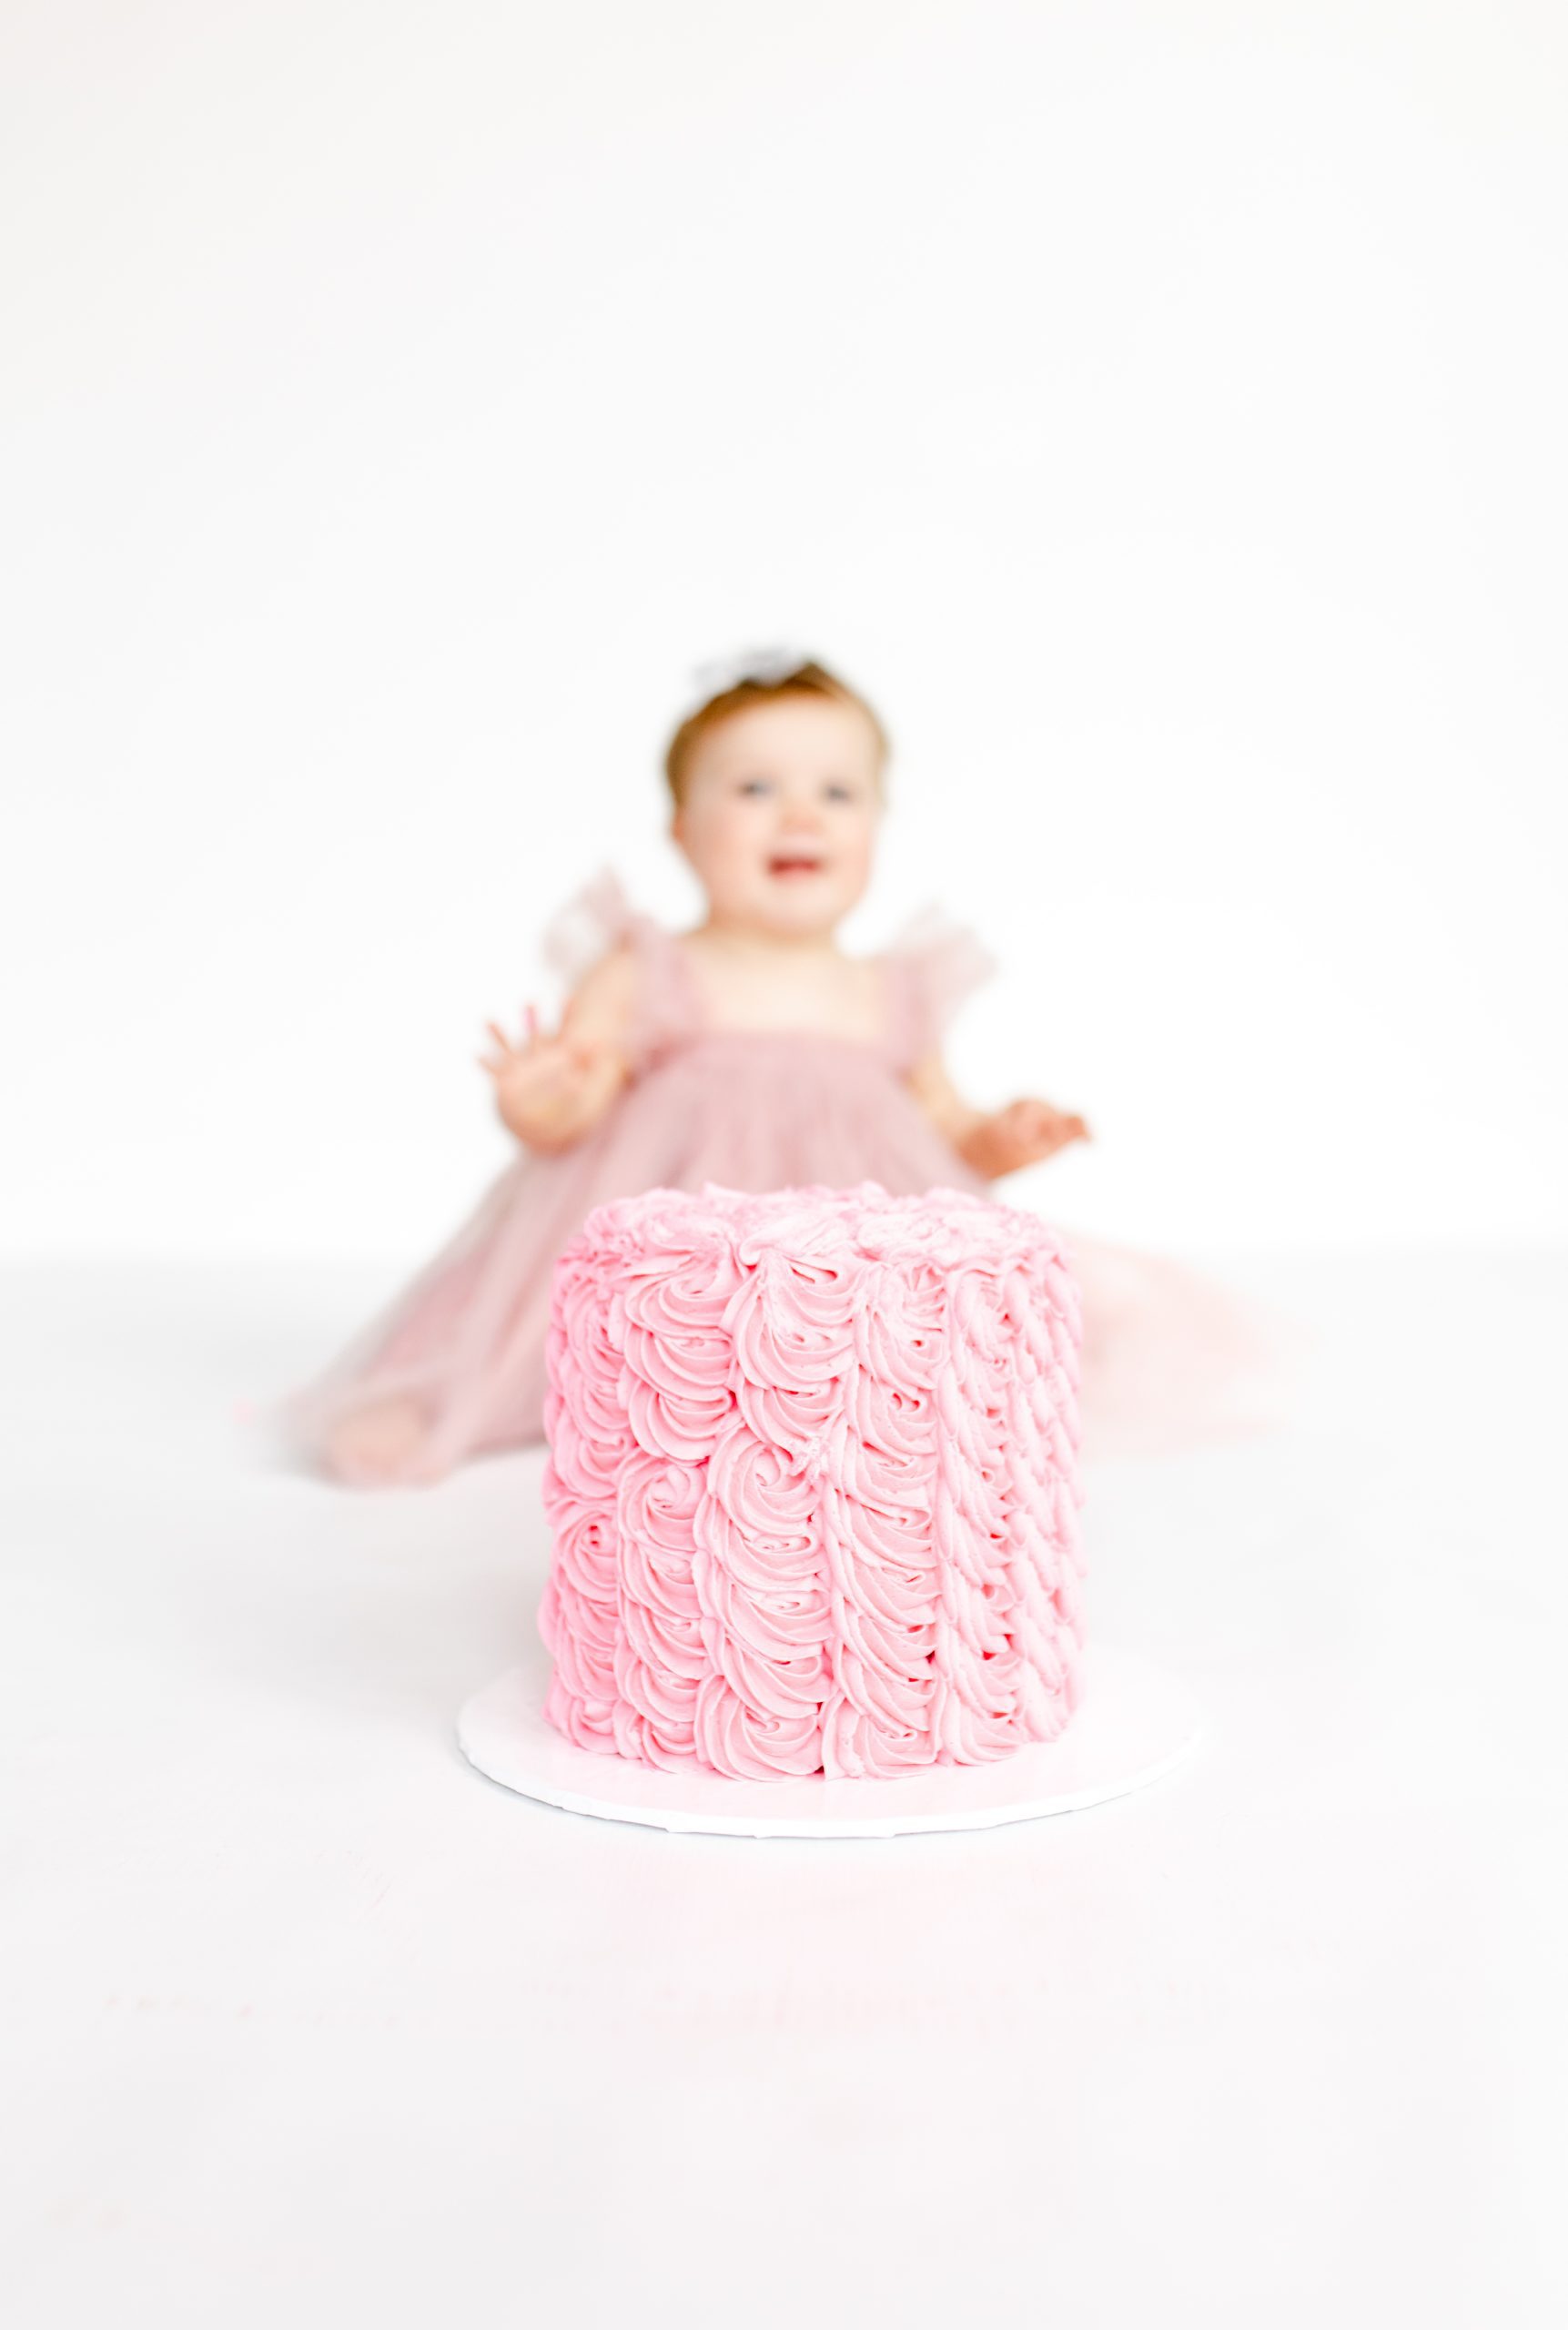 pink smash cake with a baby girl blurred in the background, in a pink dress looking at her smash cake by Northern Virginia Baby Photographer